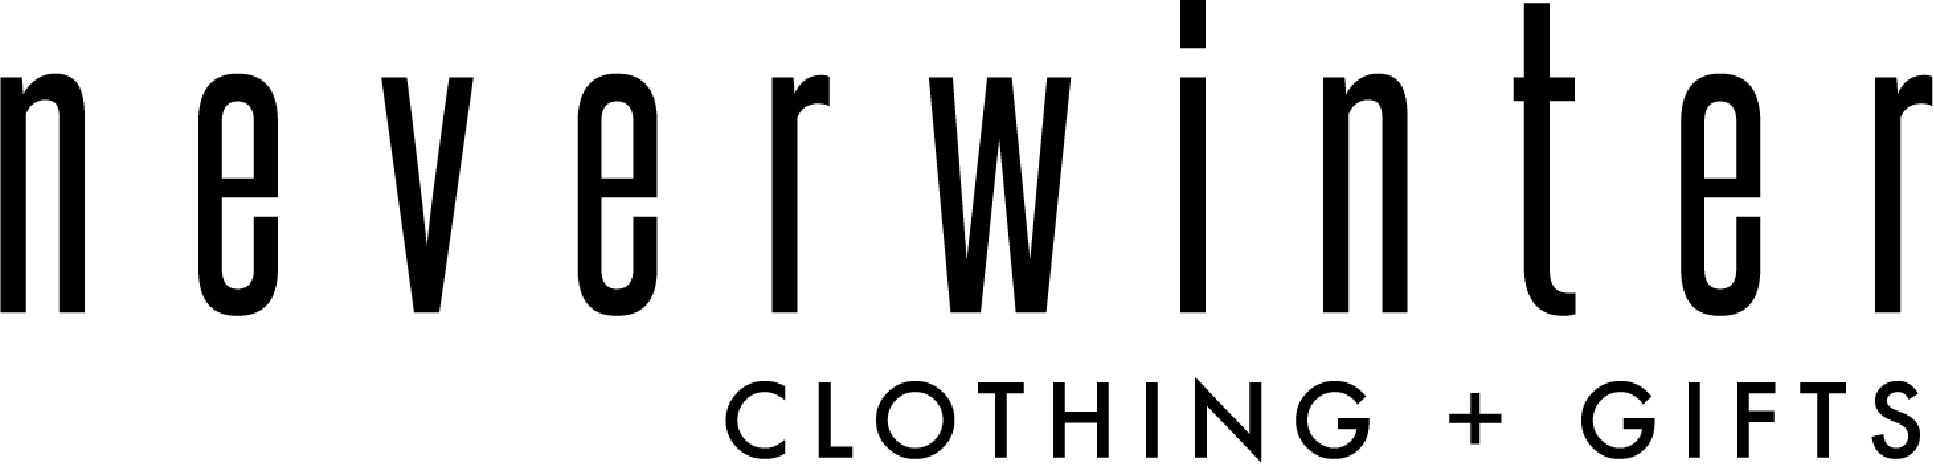 NEVERWINTER CLOTHING CO